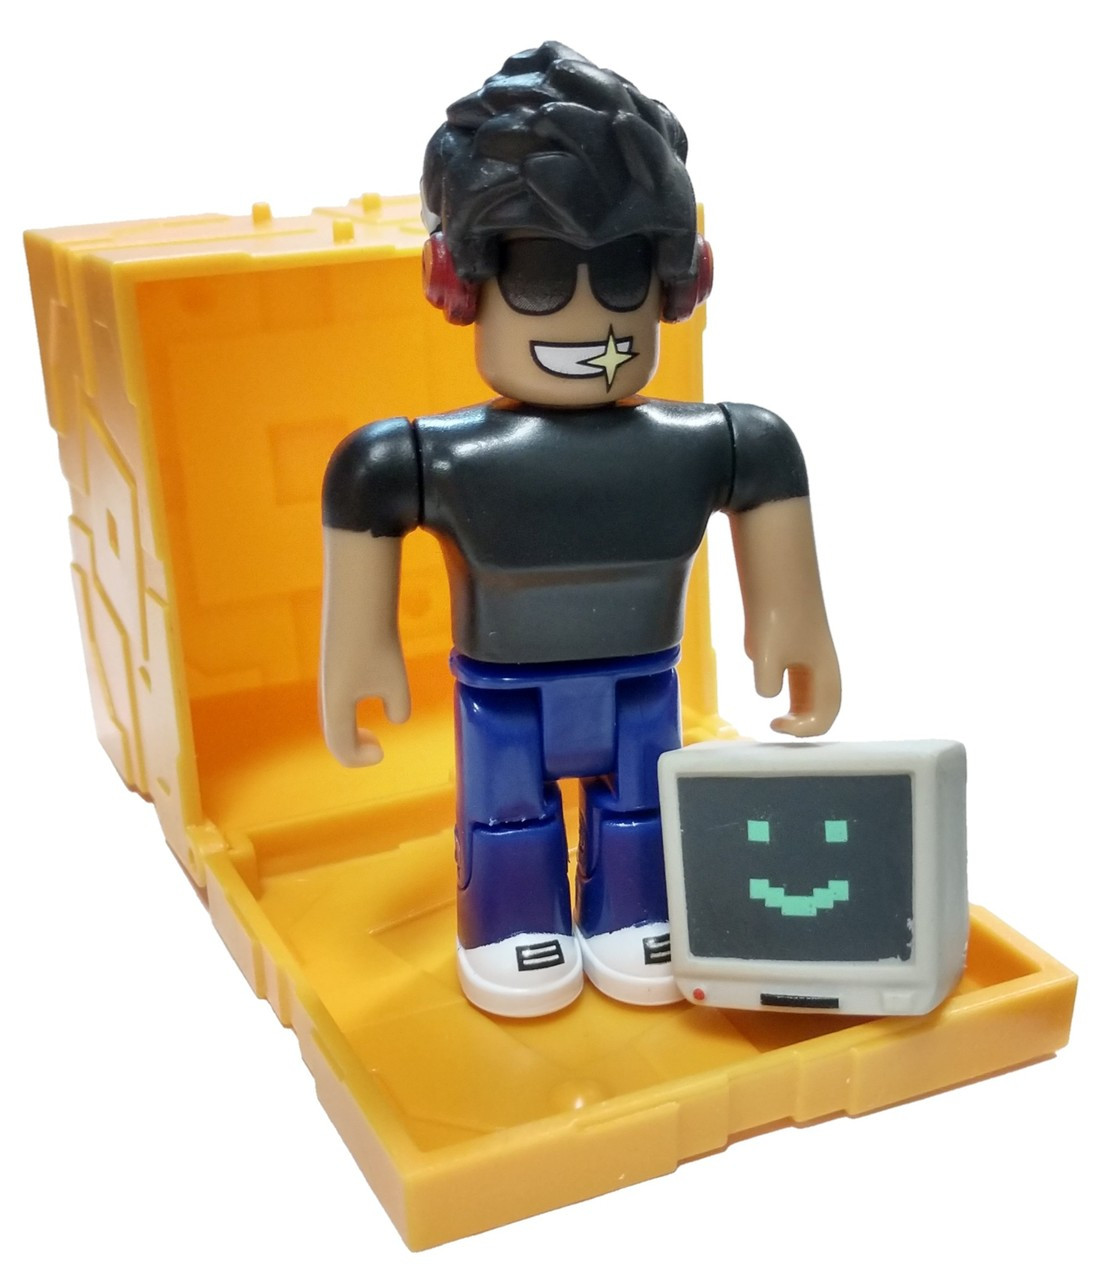 Roblox Series 5 Simbuilder Mini Figure With Gold Cube And Online Code Loose - 